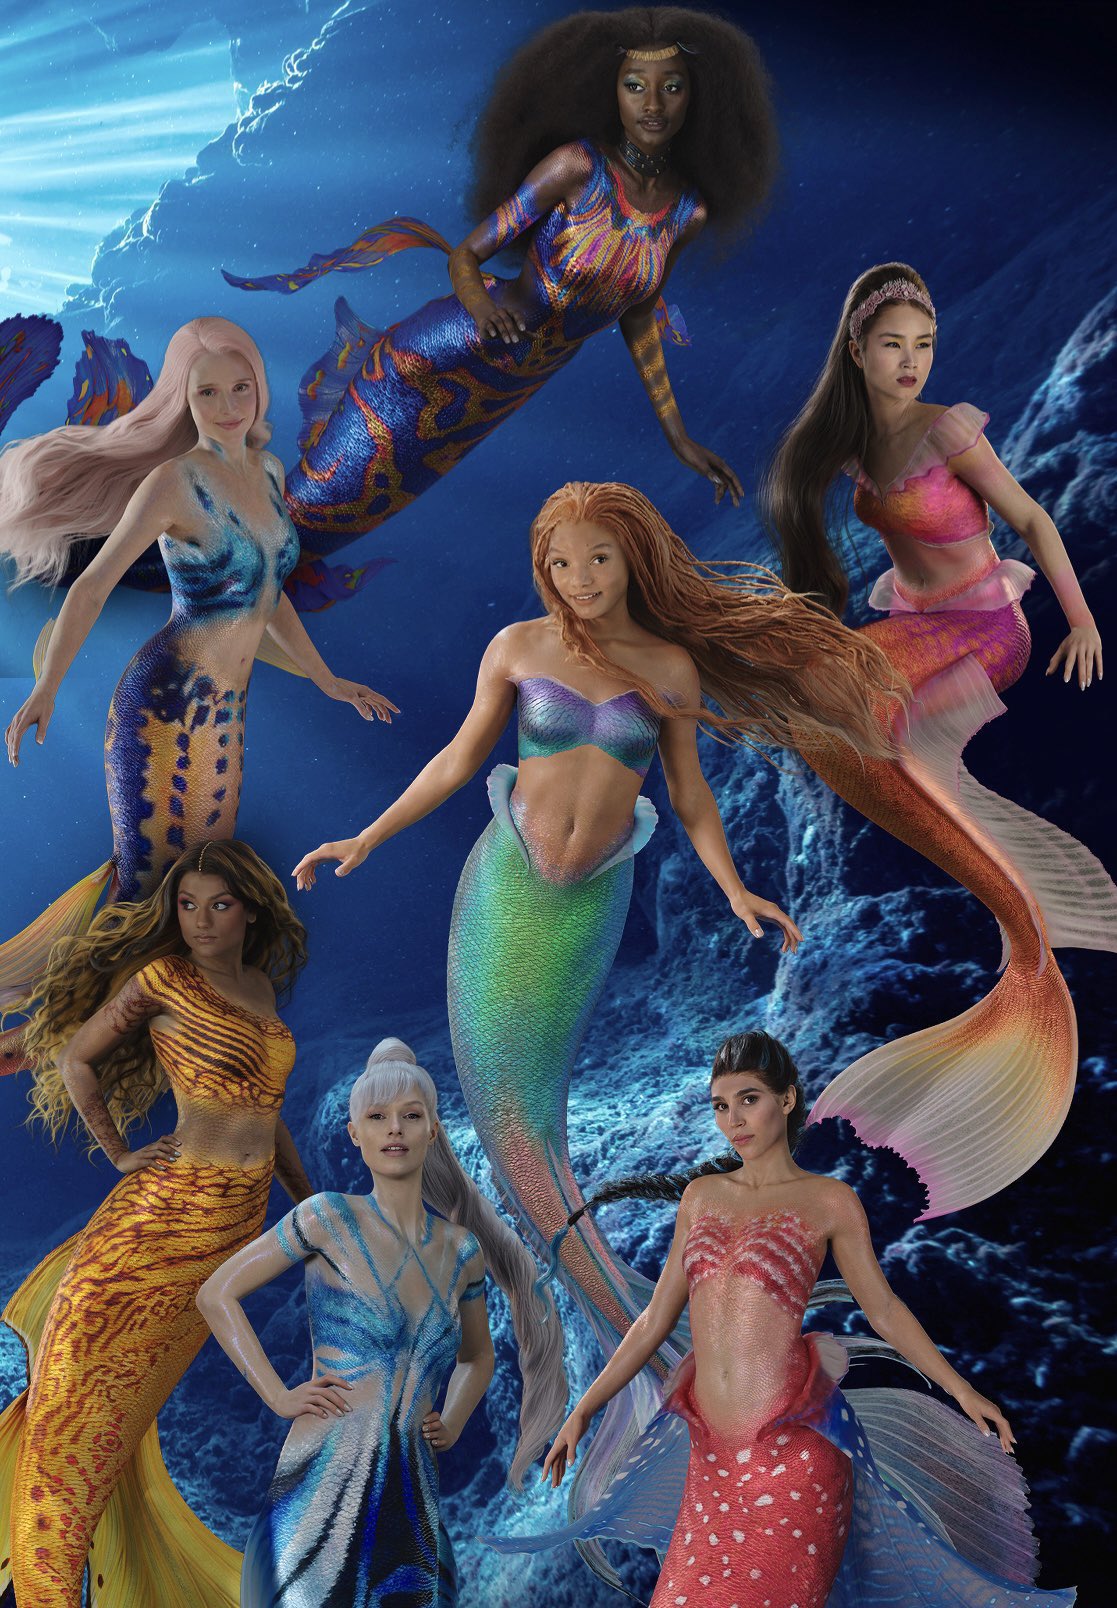 The Little Mermaid Live Action Hits the Cinema – The Cat's Eye View